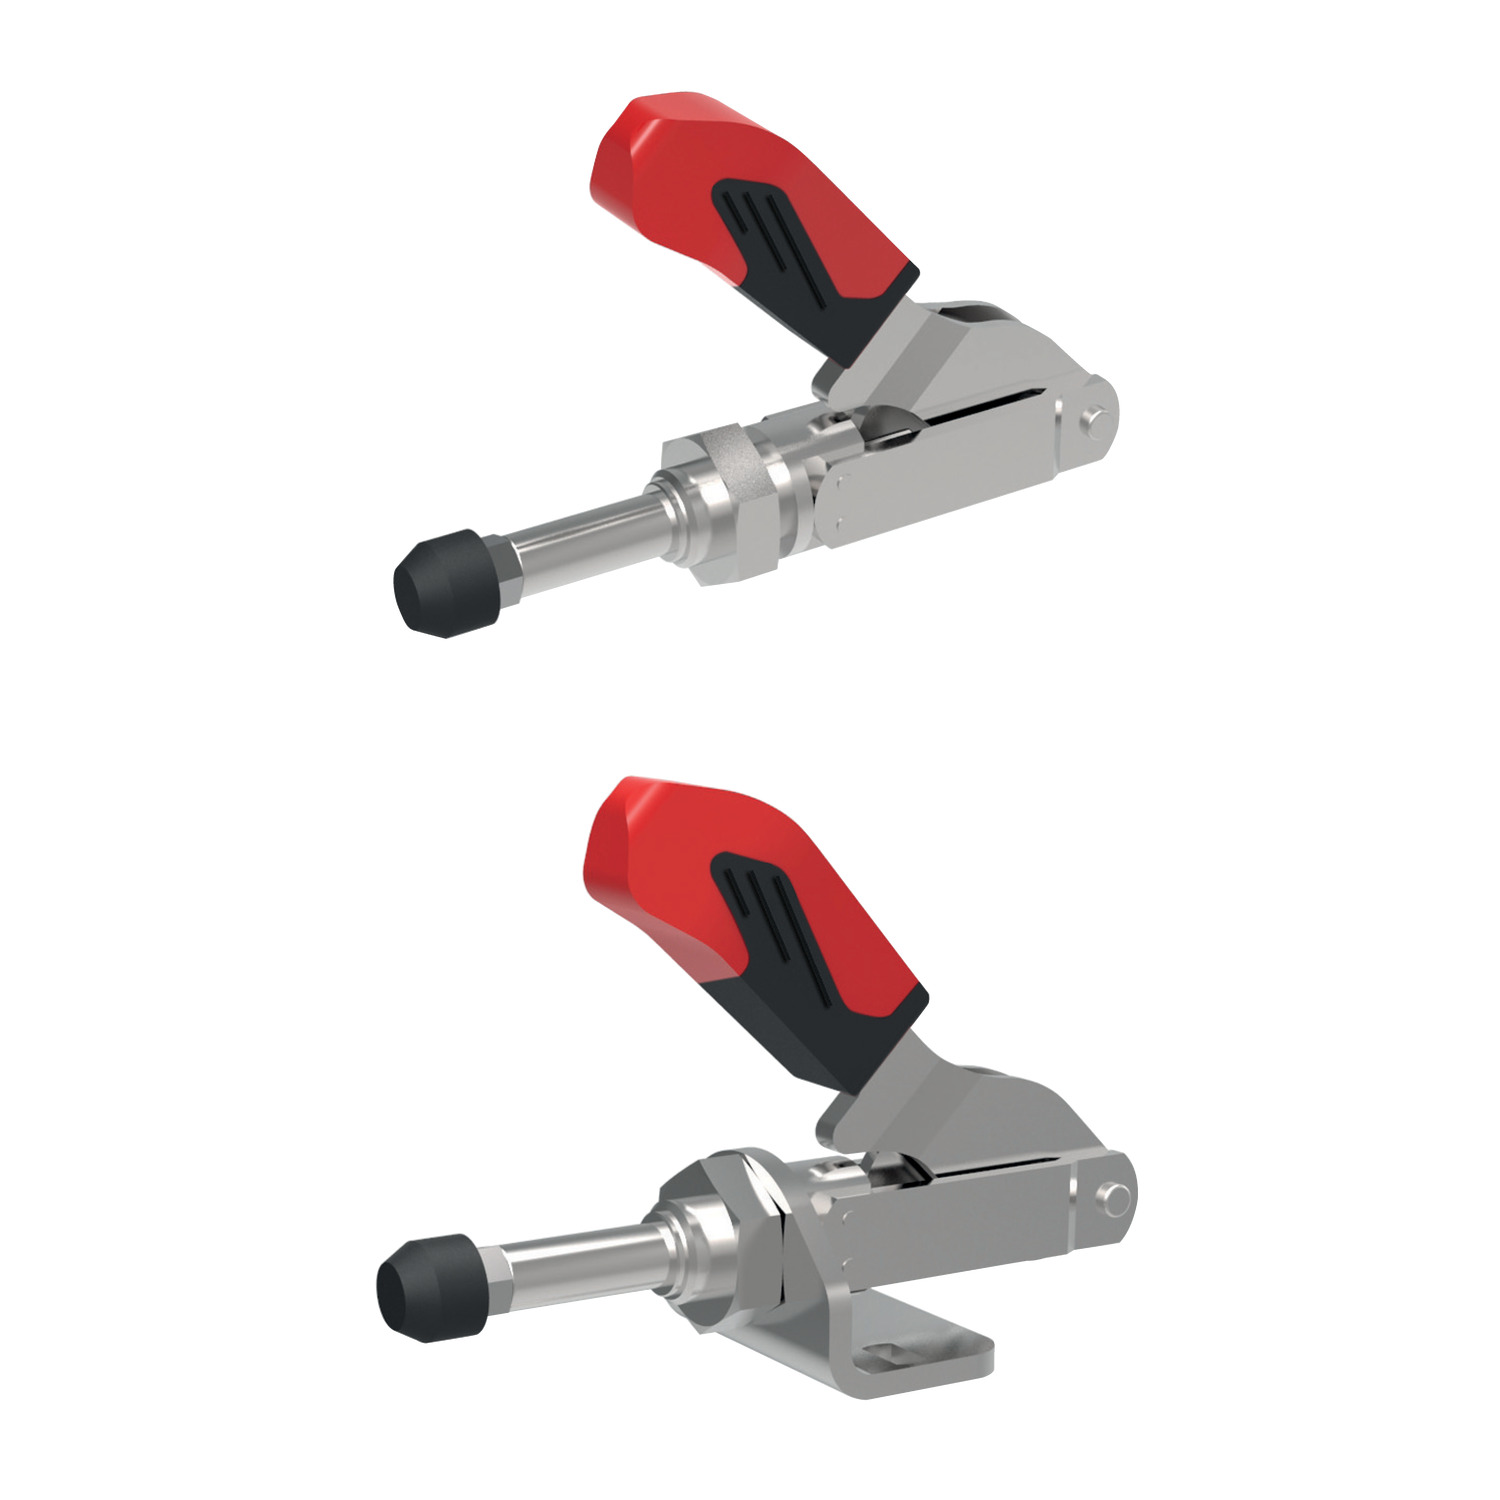 Push-Pull Type Toggle Clamps Extended push rod push pull toggle clamps to allow for better adjustment of larger work pieces. Comes with clamping screw and rubber nose.